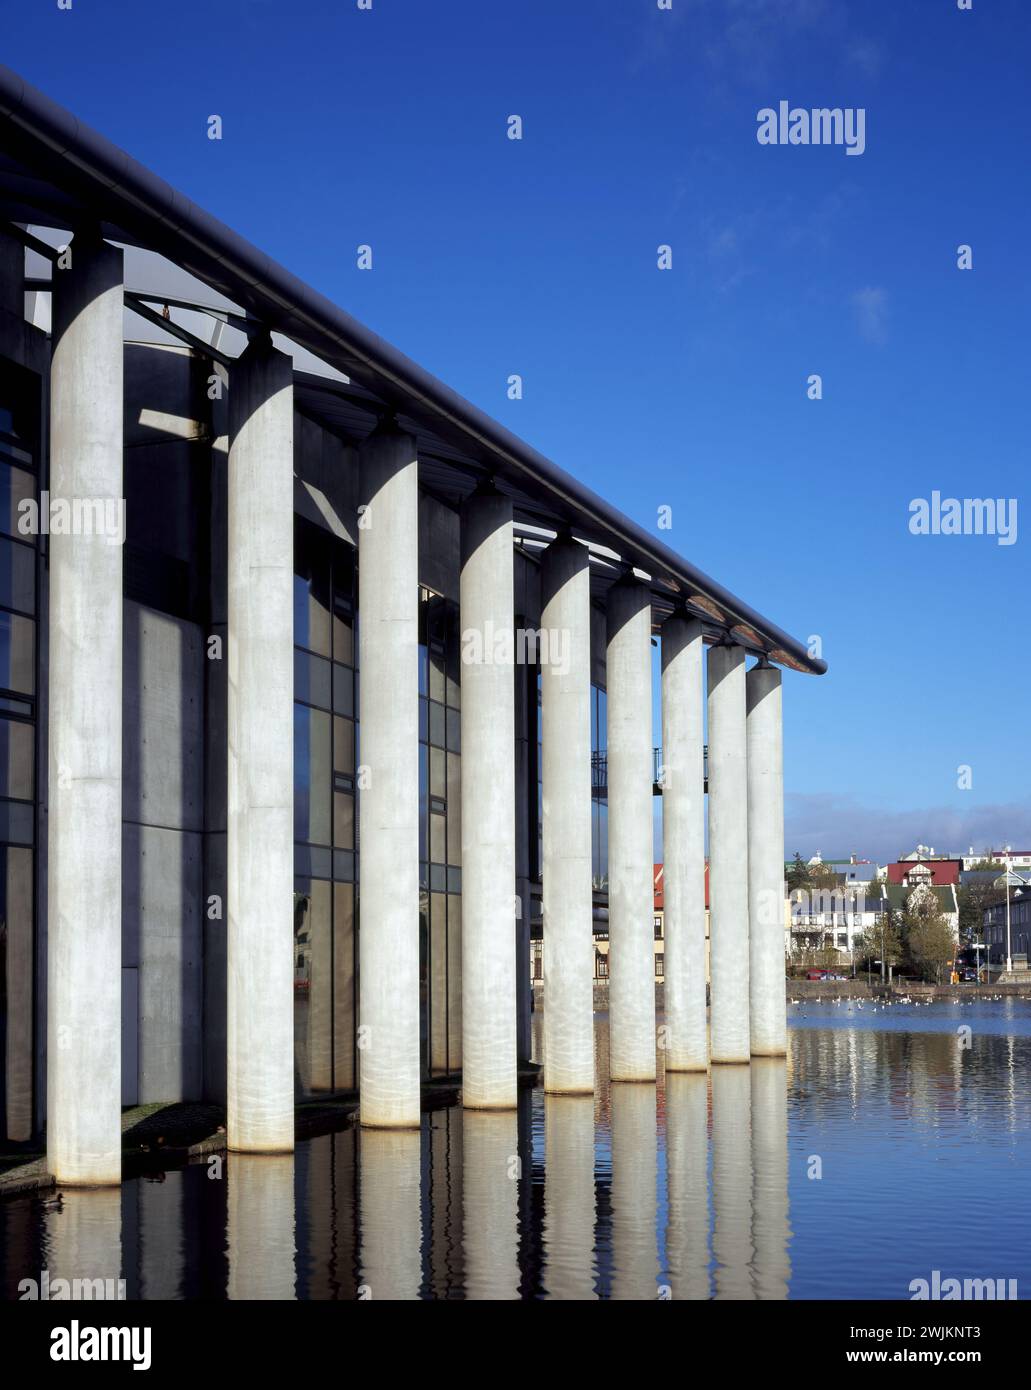 A building with pillars on the side of it Stock Photo